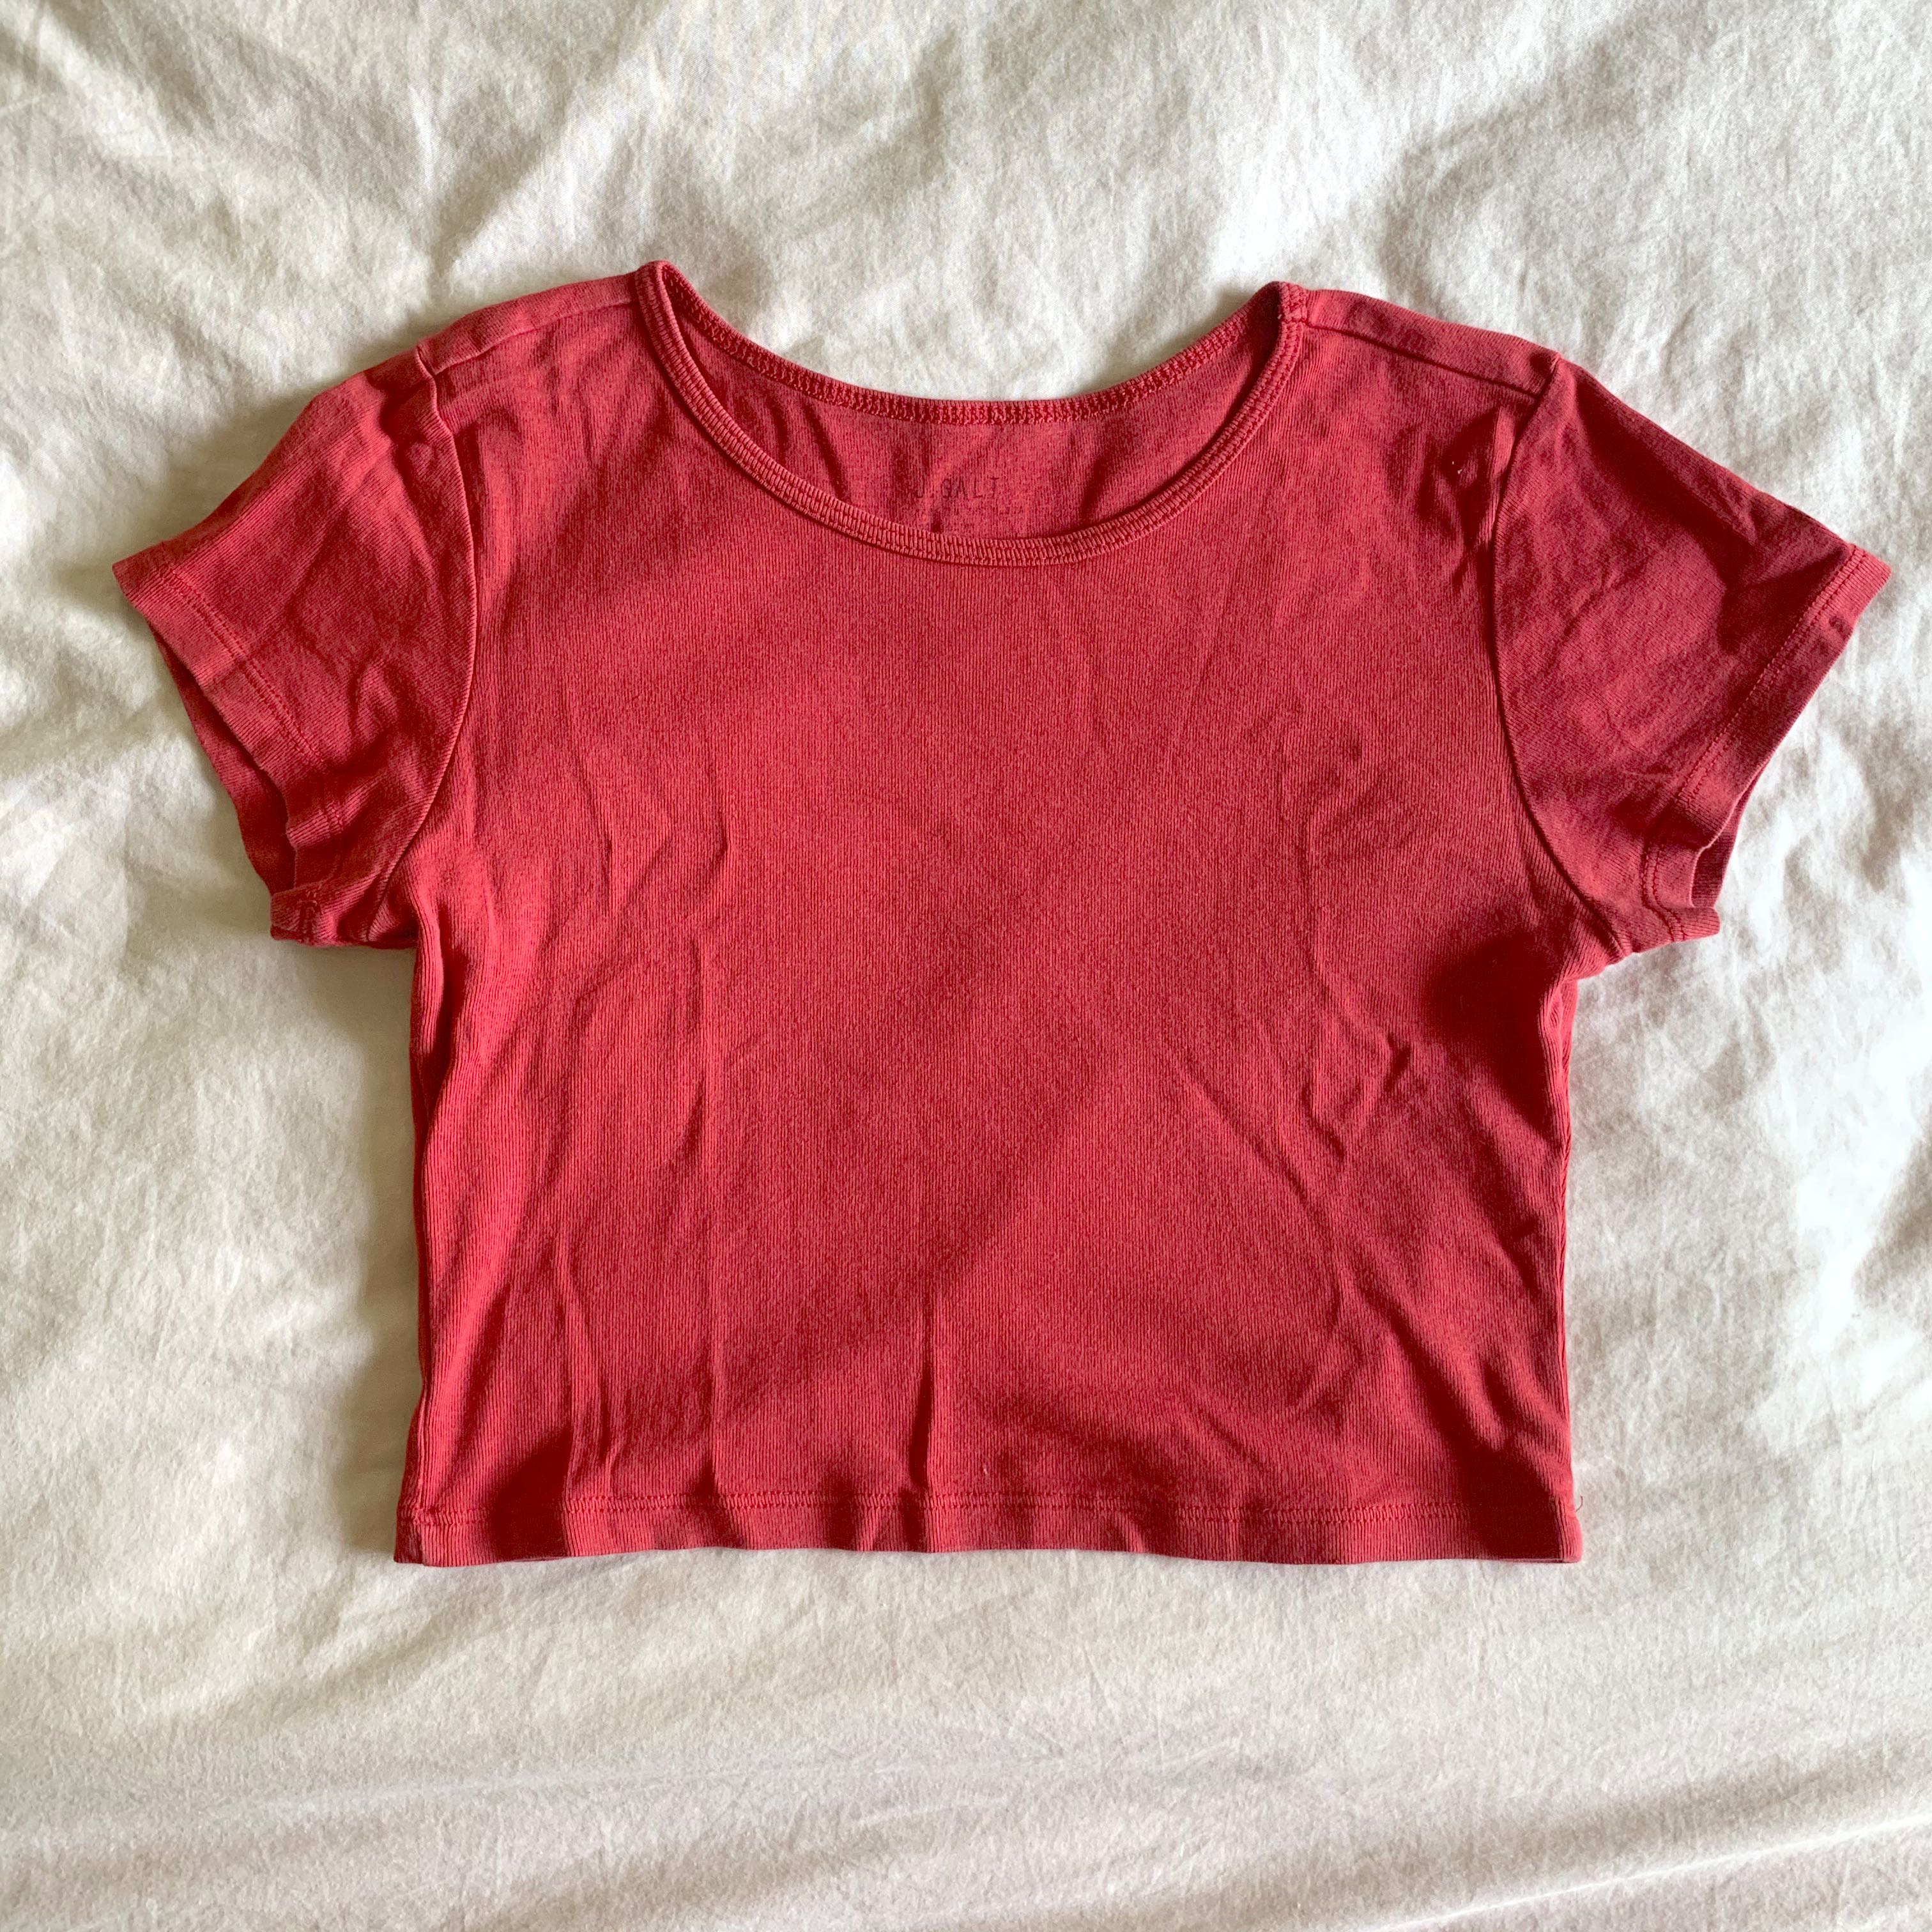 Brandy Melville red ashlyn crop top, Women's Fashion, Clothes, Tops on ...